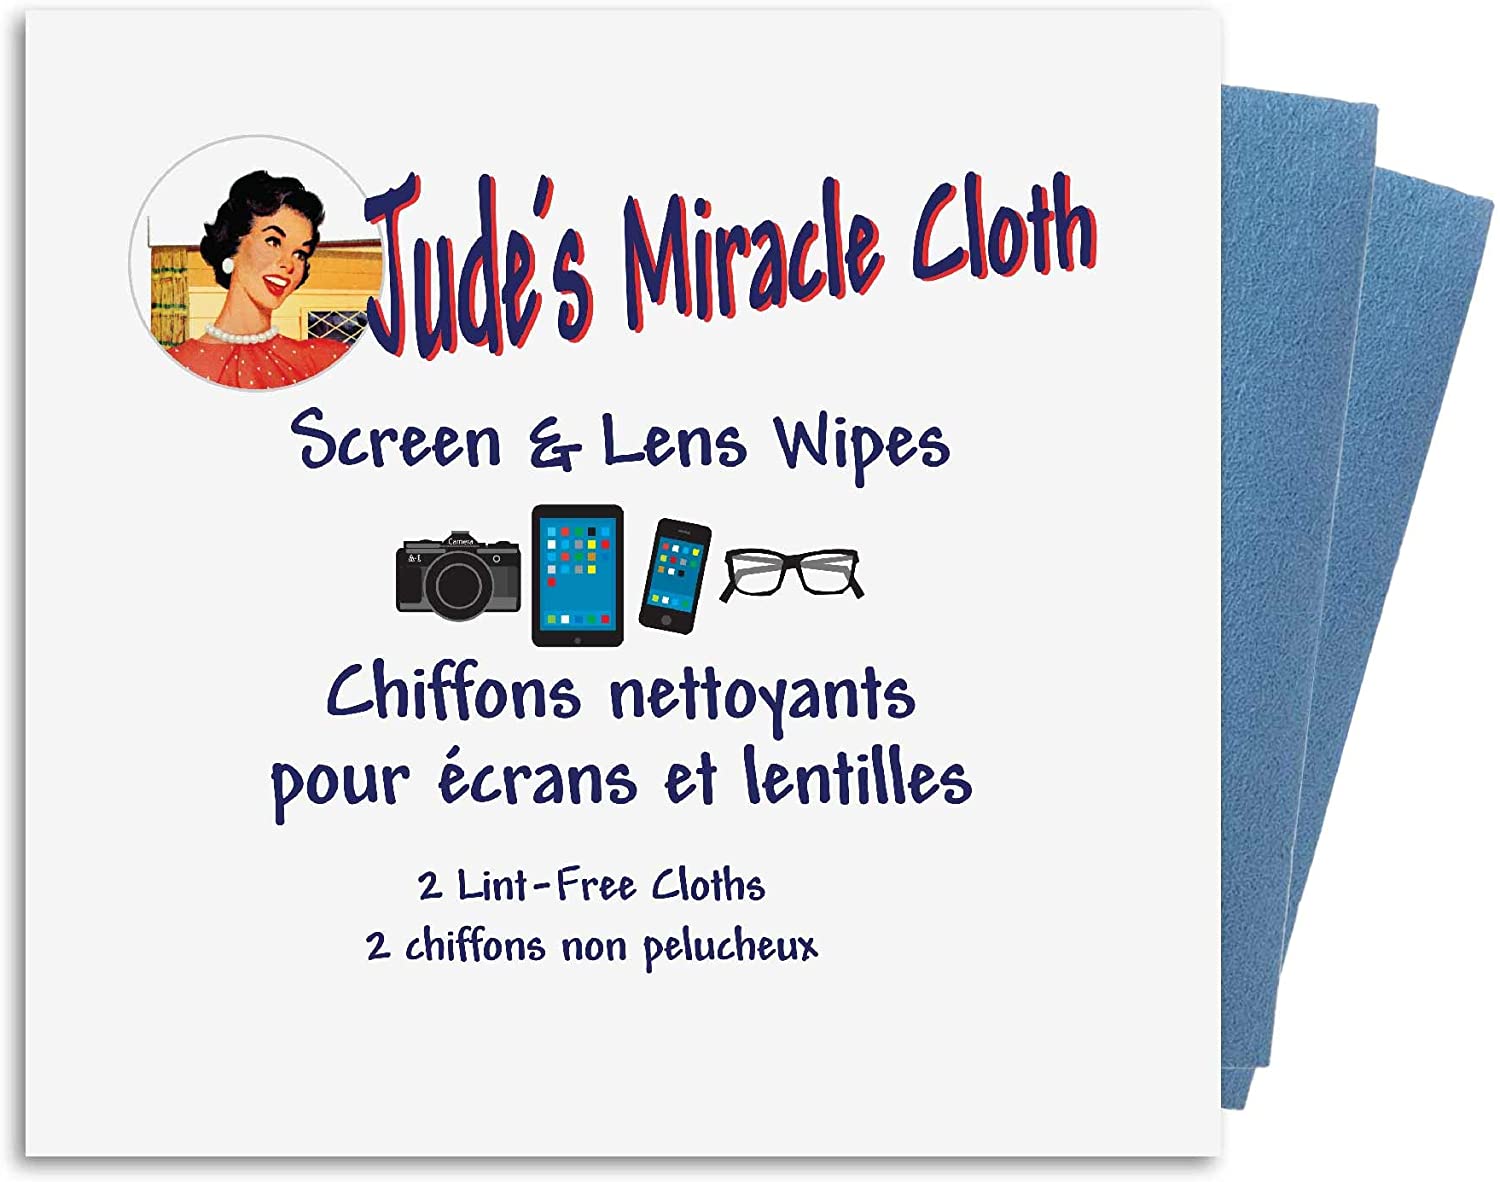 Jude's Miracle Cloth Screen & Lens Wipes - Kitchen Nook